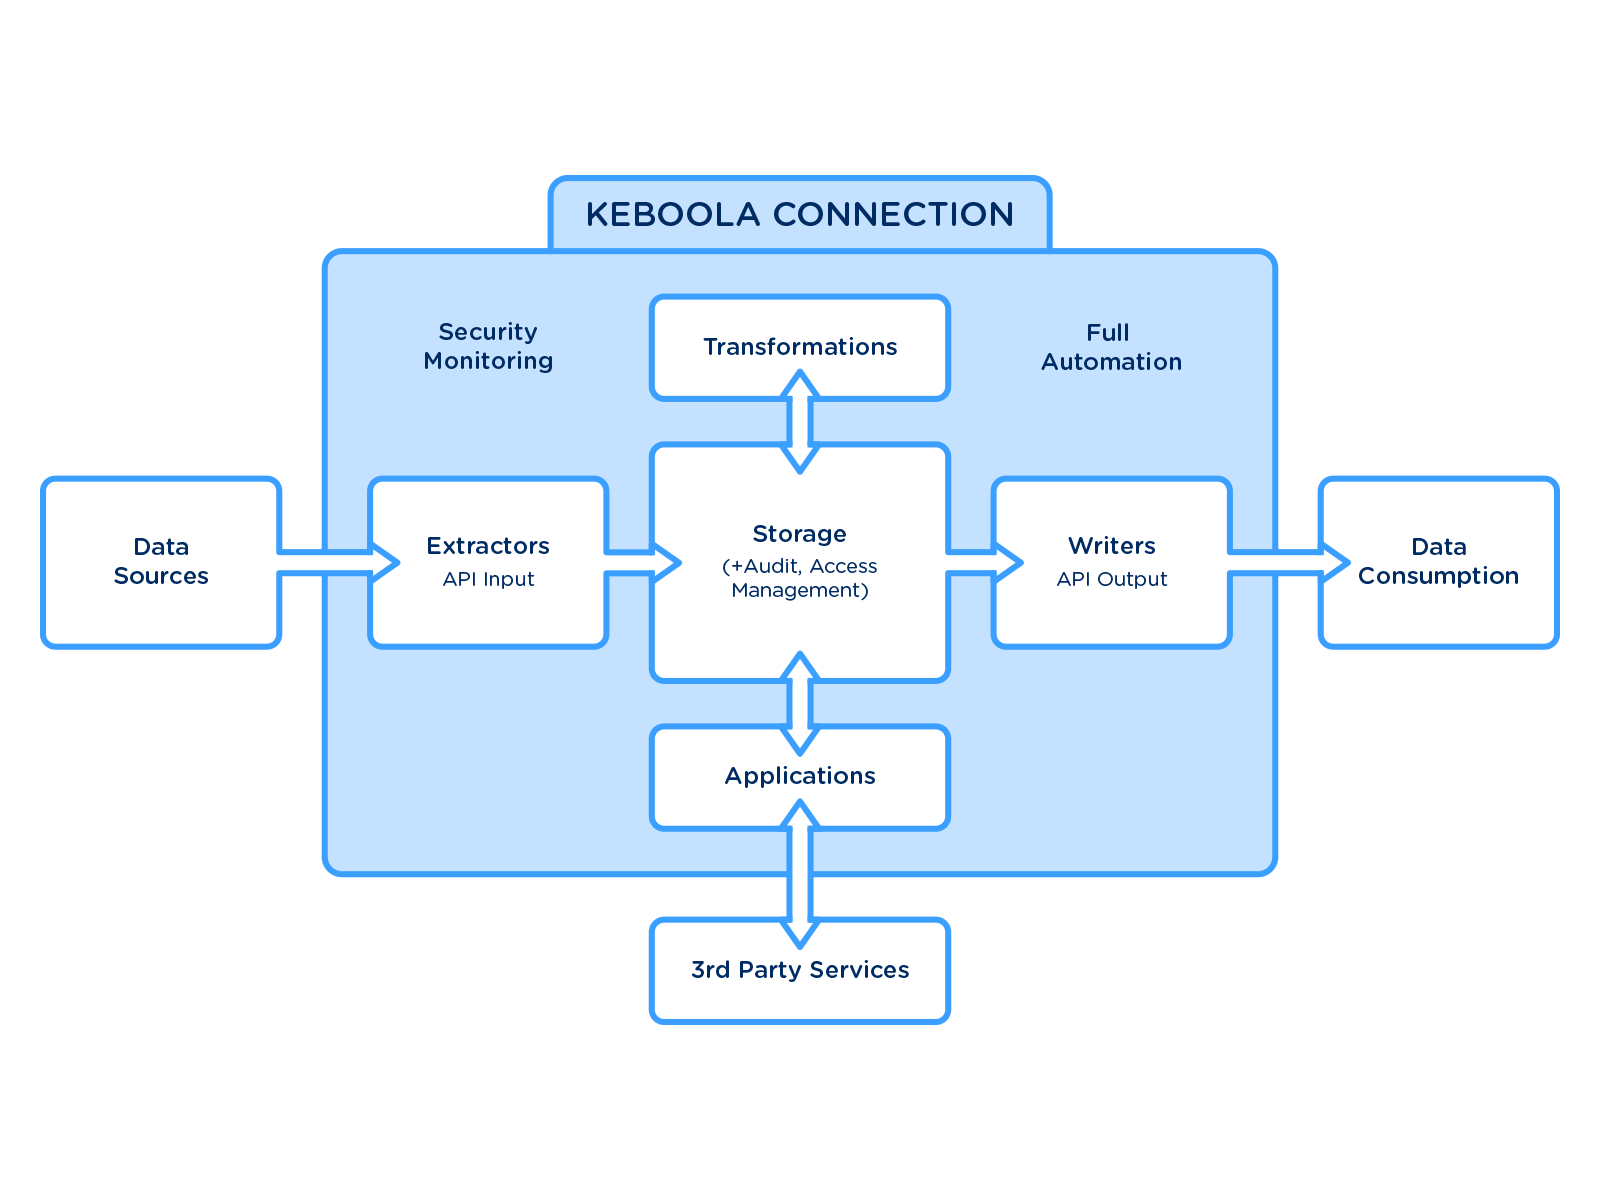 Overview of Keboola Components